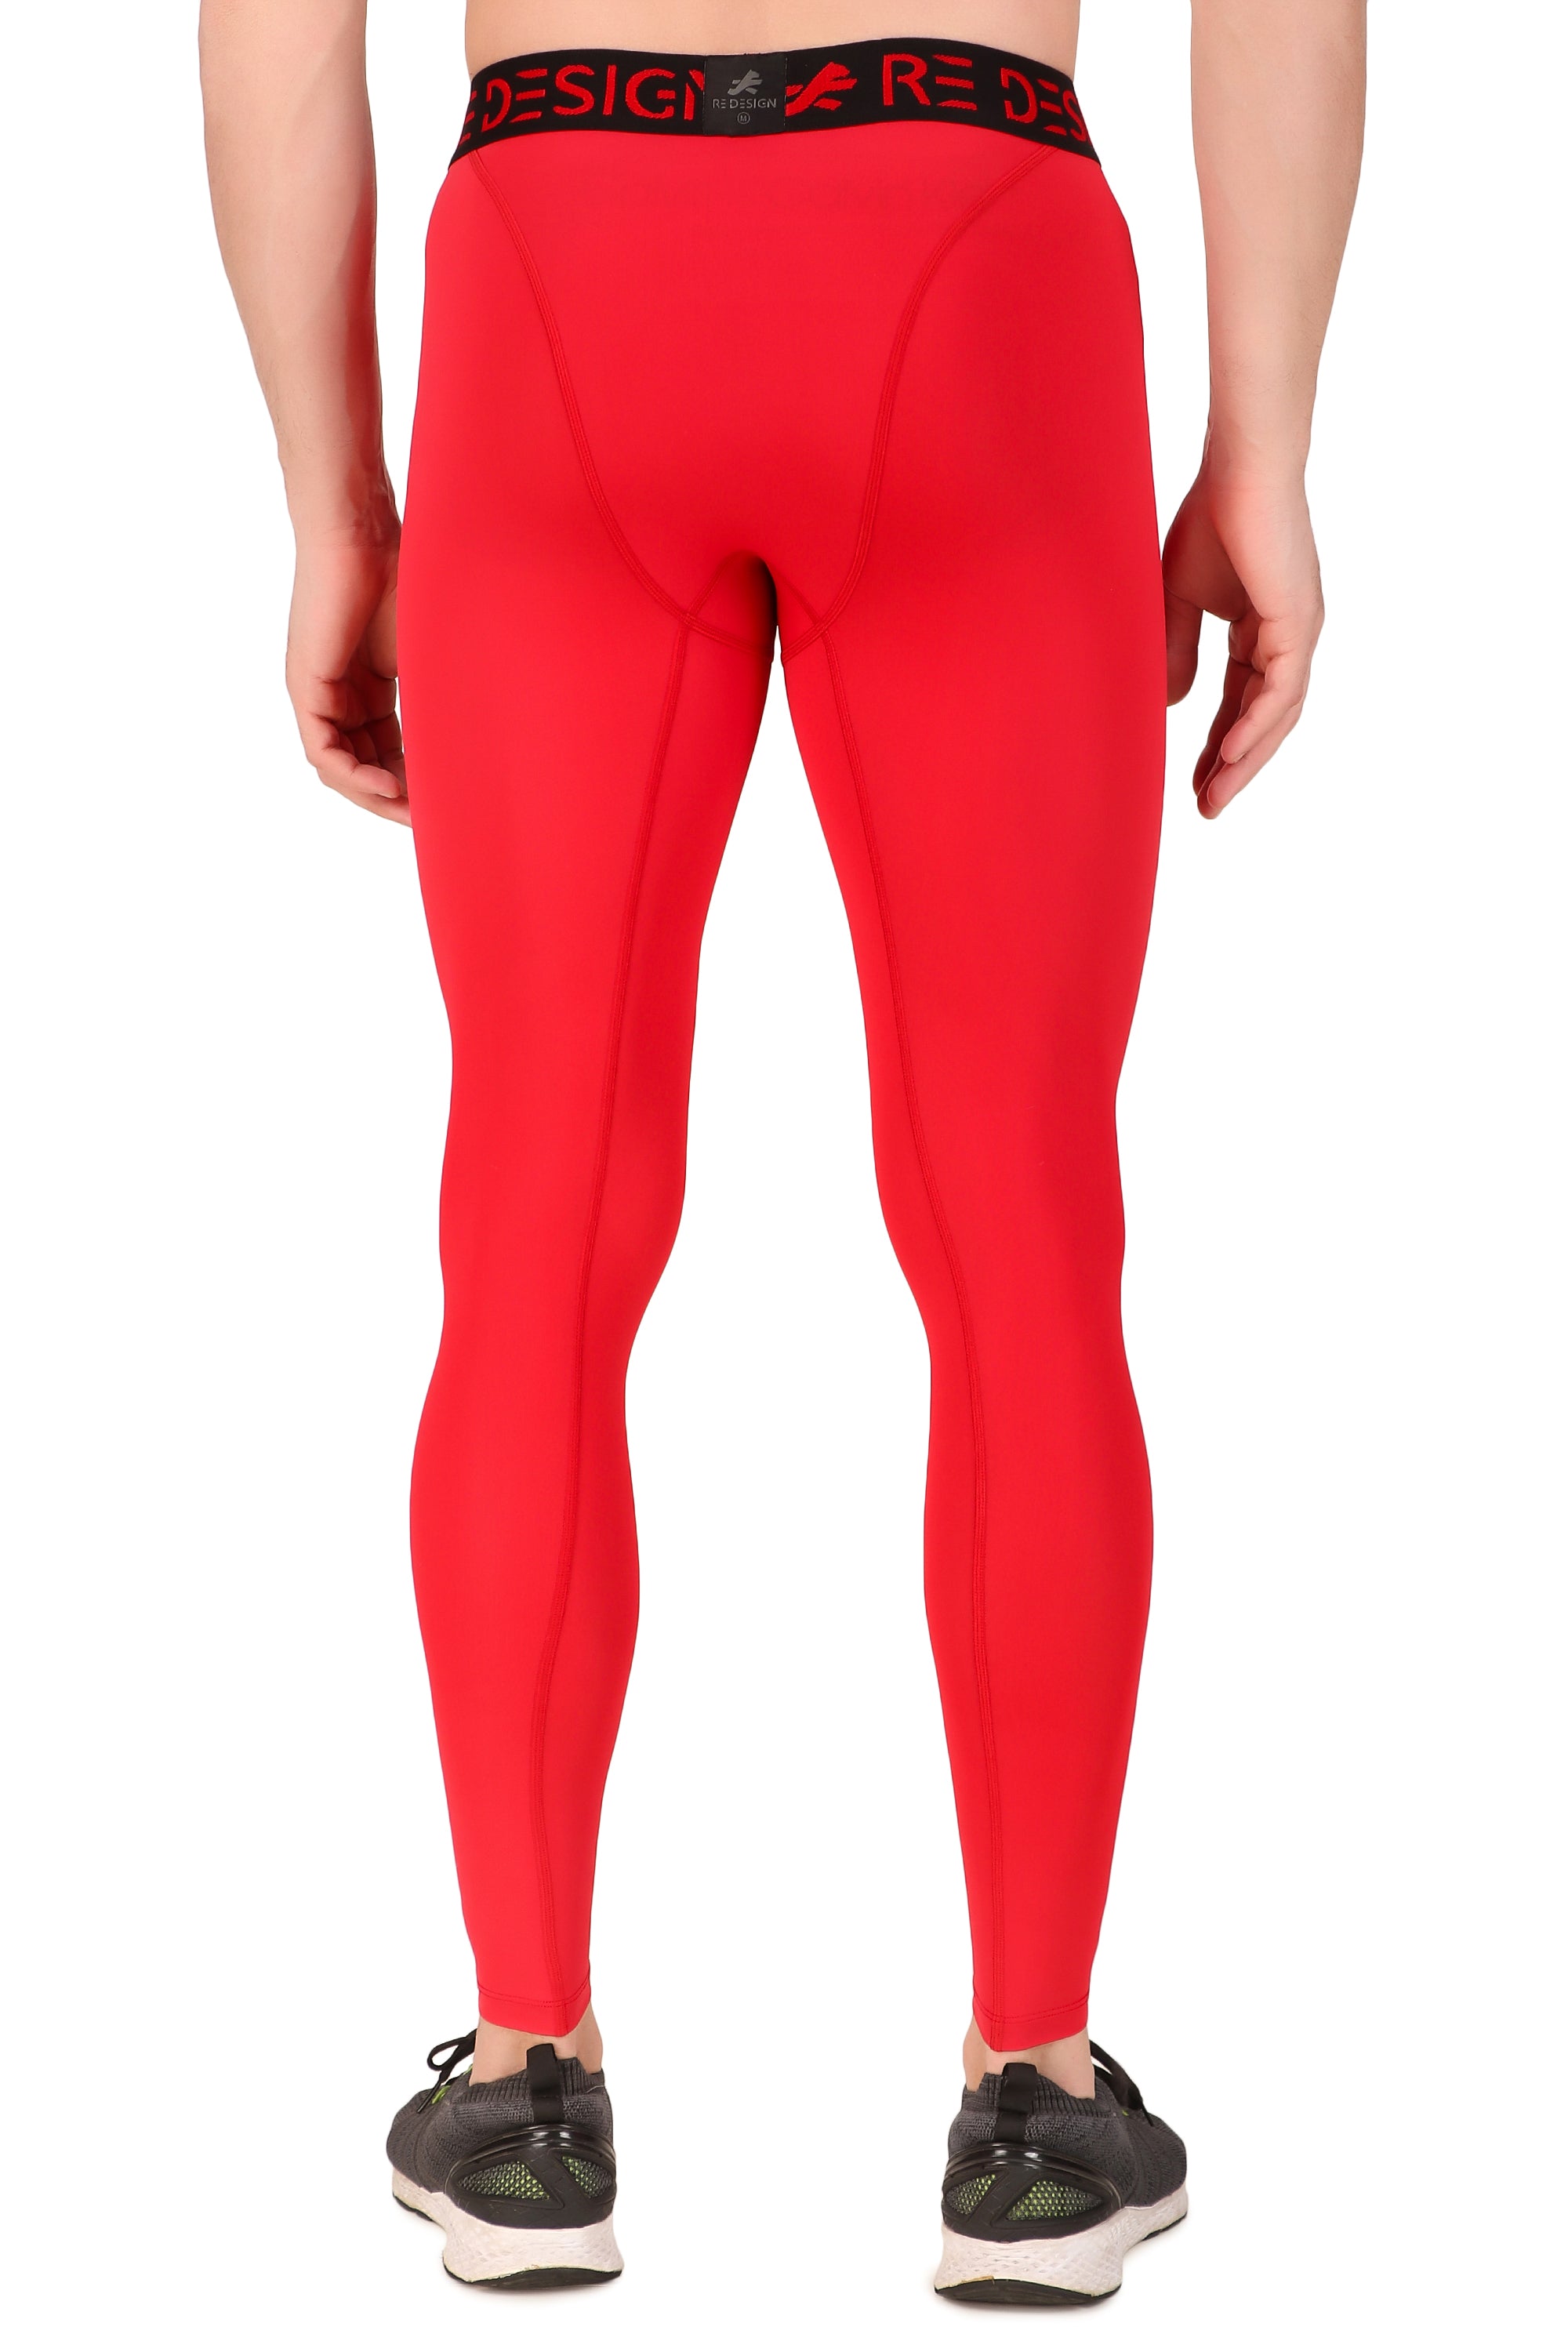 Nylon Compression Pant and Full Tights For Men (Red)